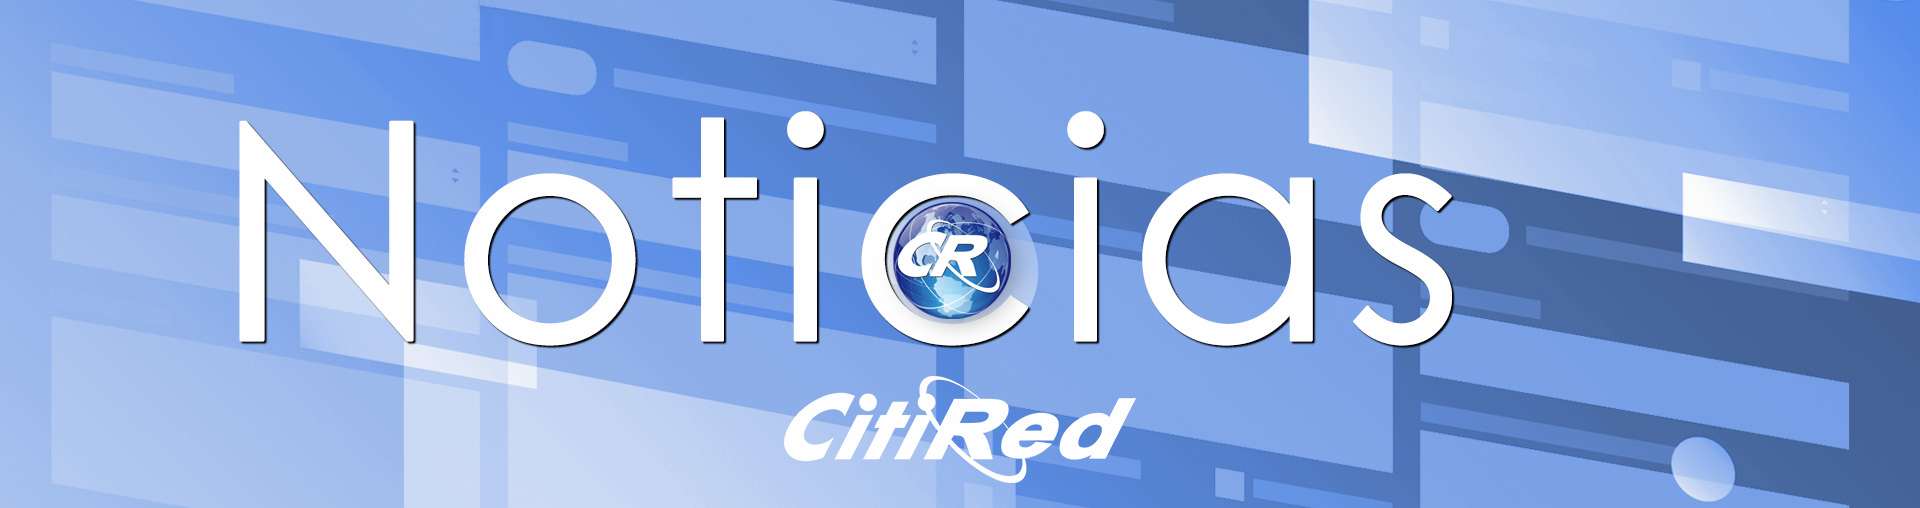 Citired-top-section-noticias